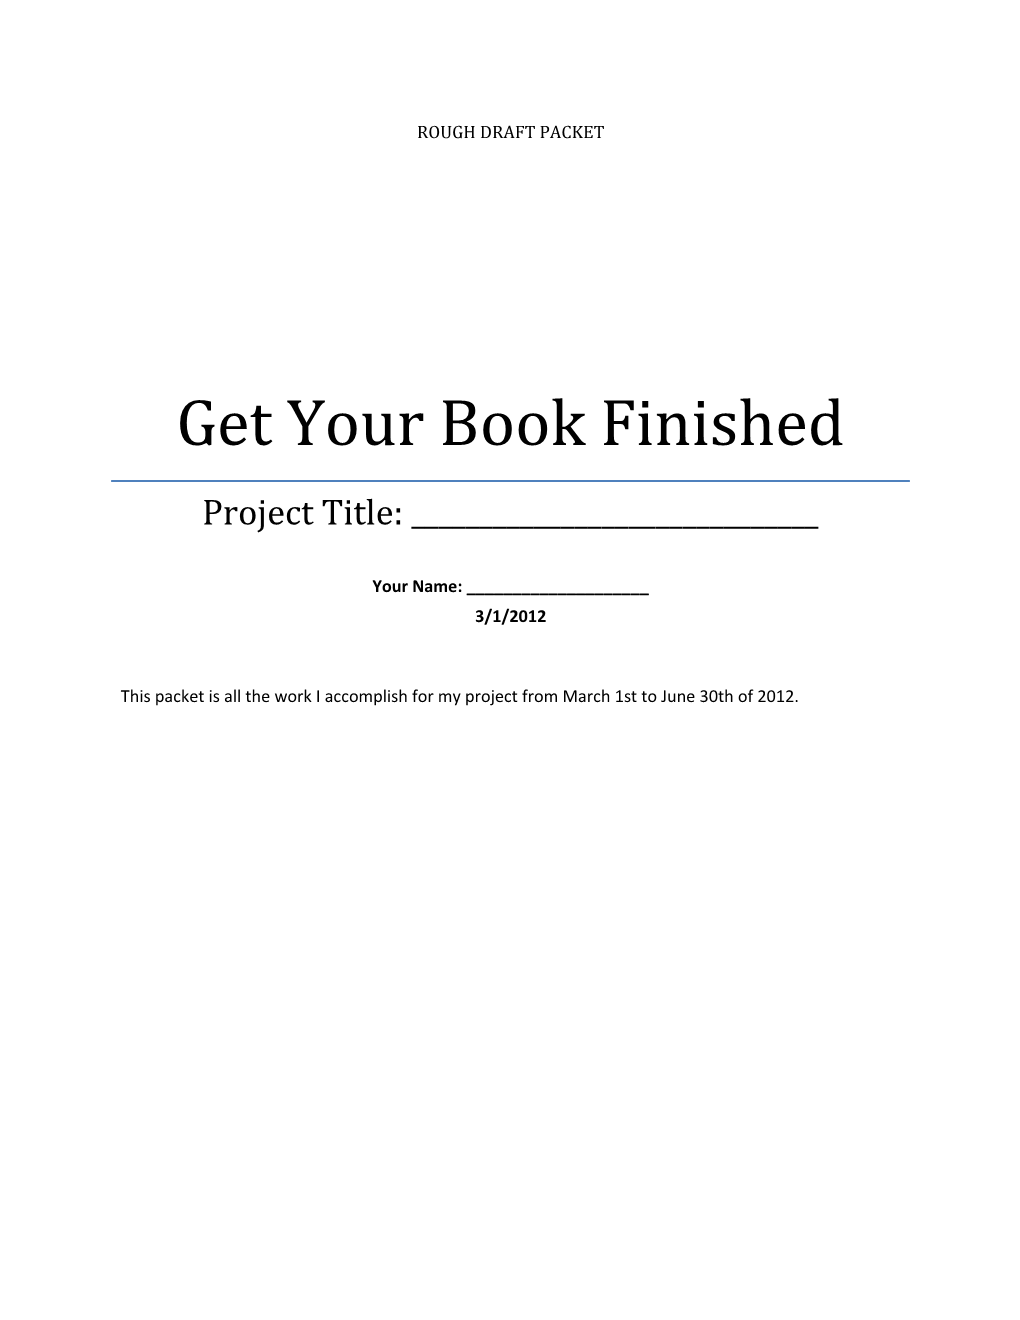 Get Your Book Finished